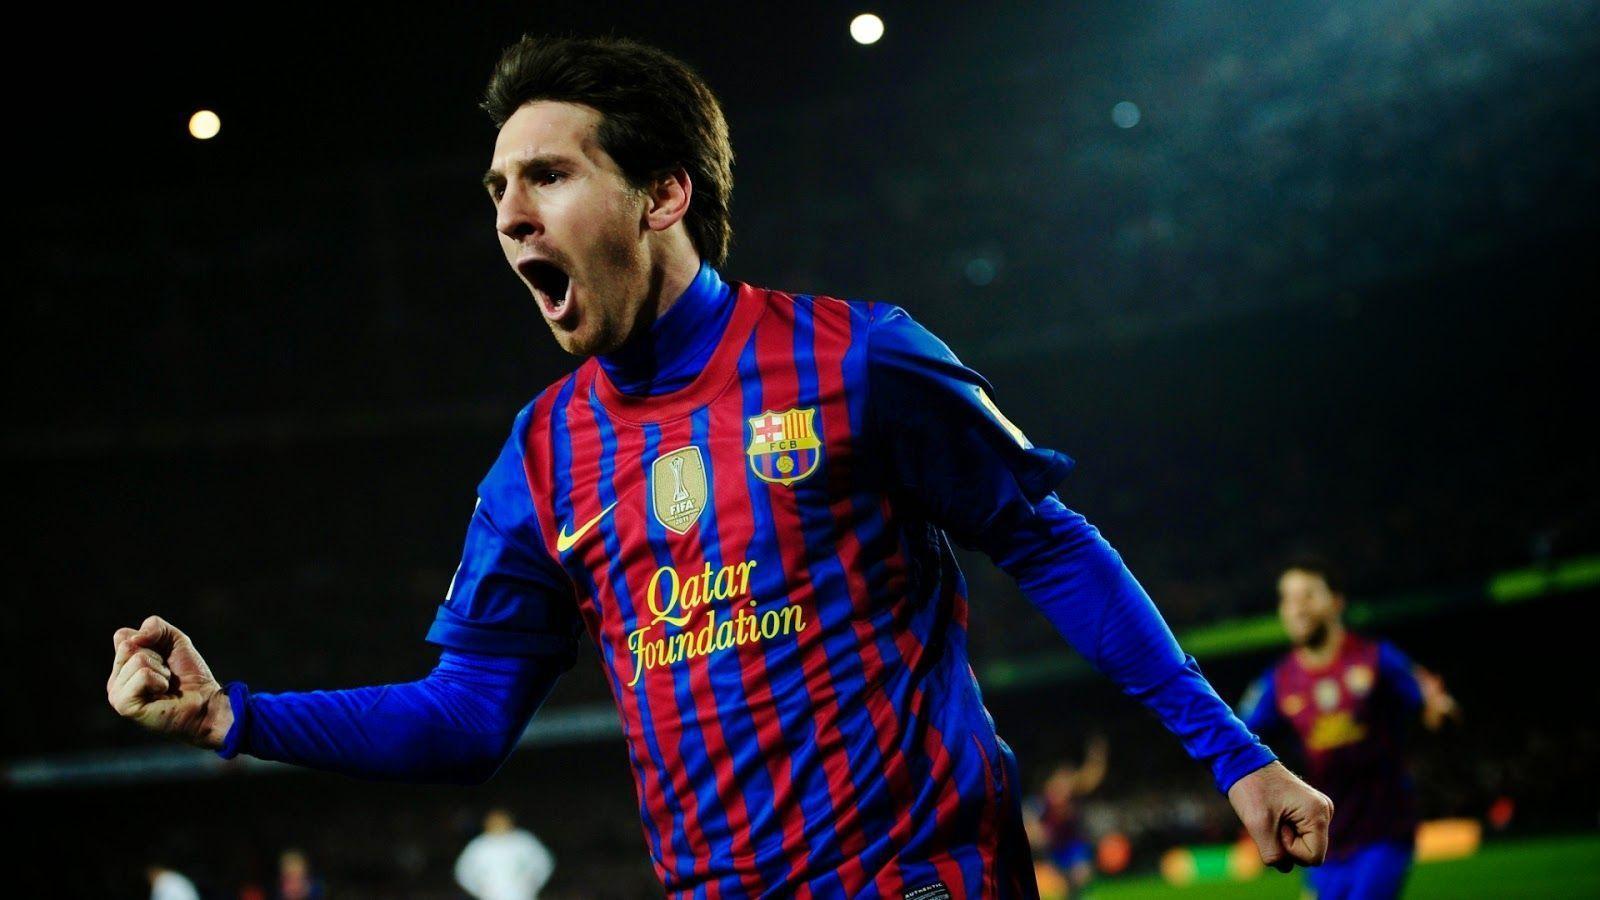 Lionel Messi Wallpapers 2016 - Wallpaper Cave